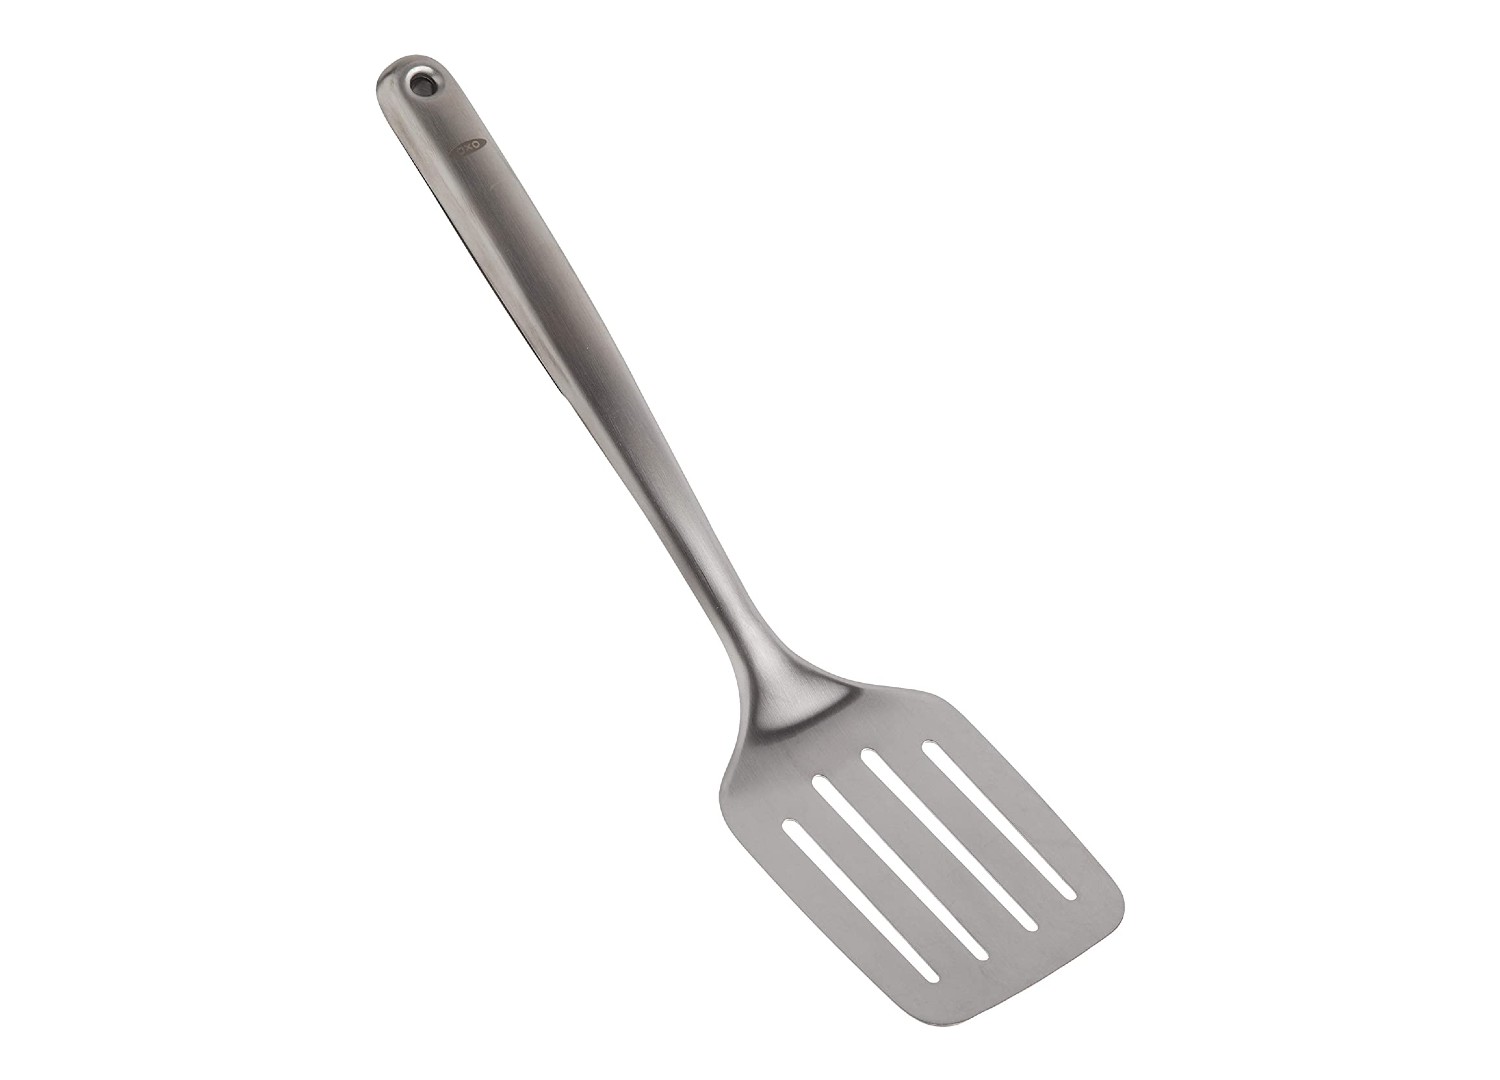 What Is A Metal Spatula Used For